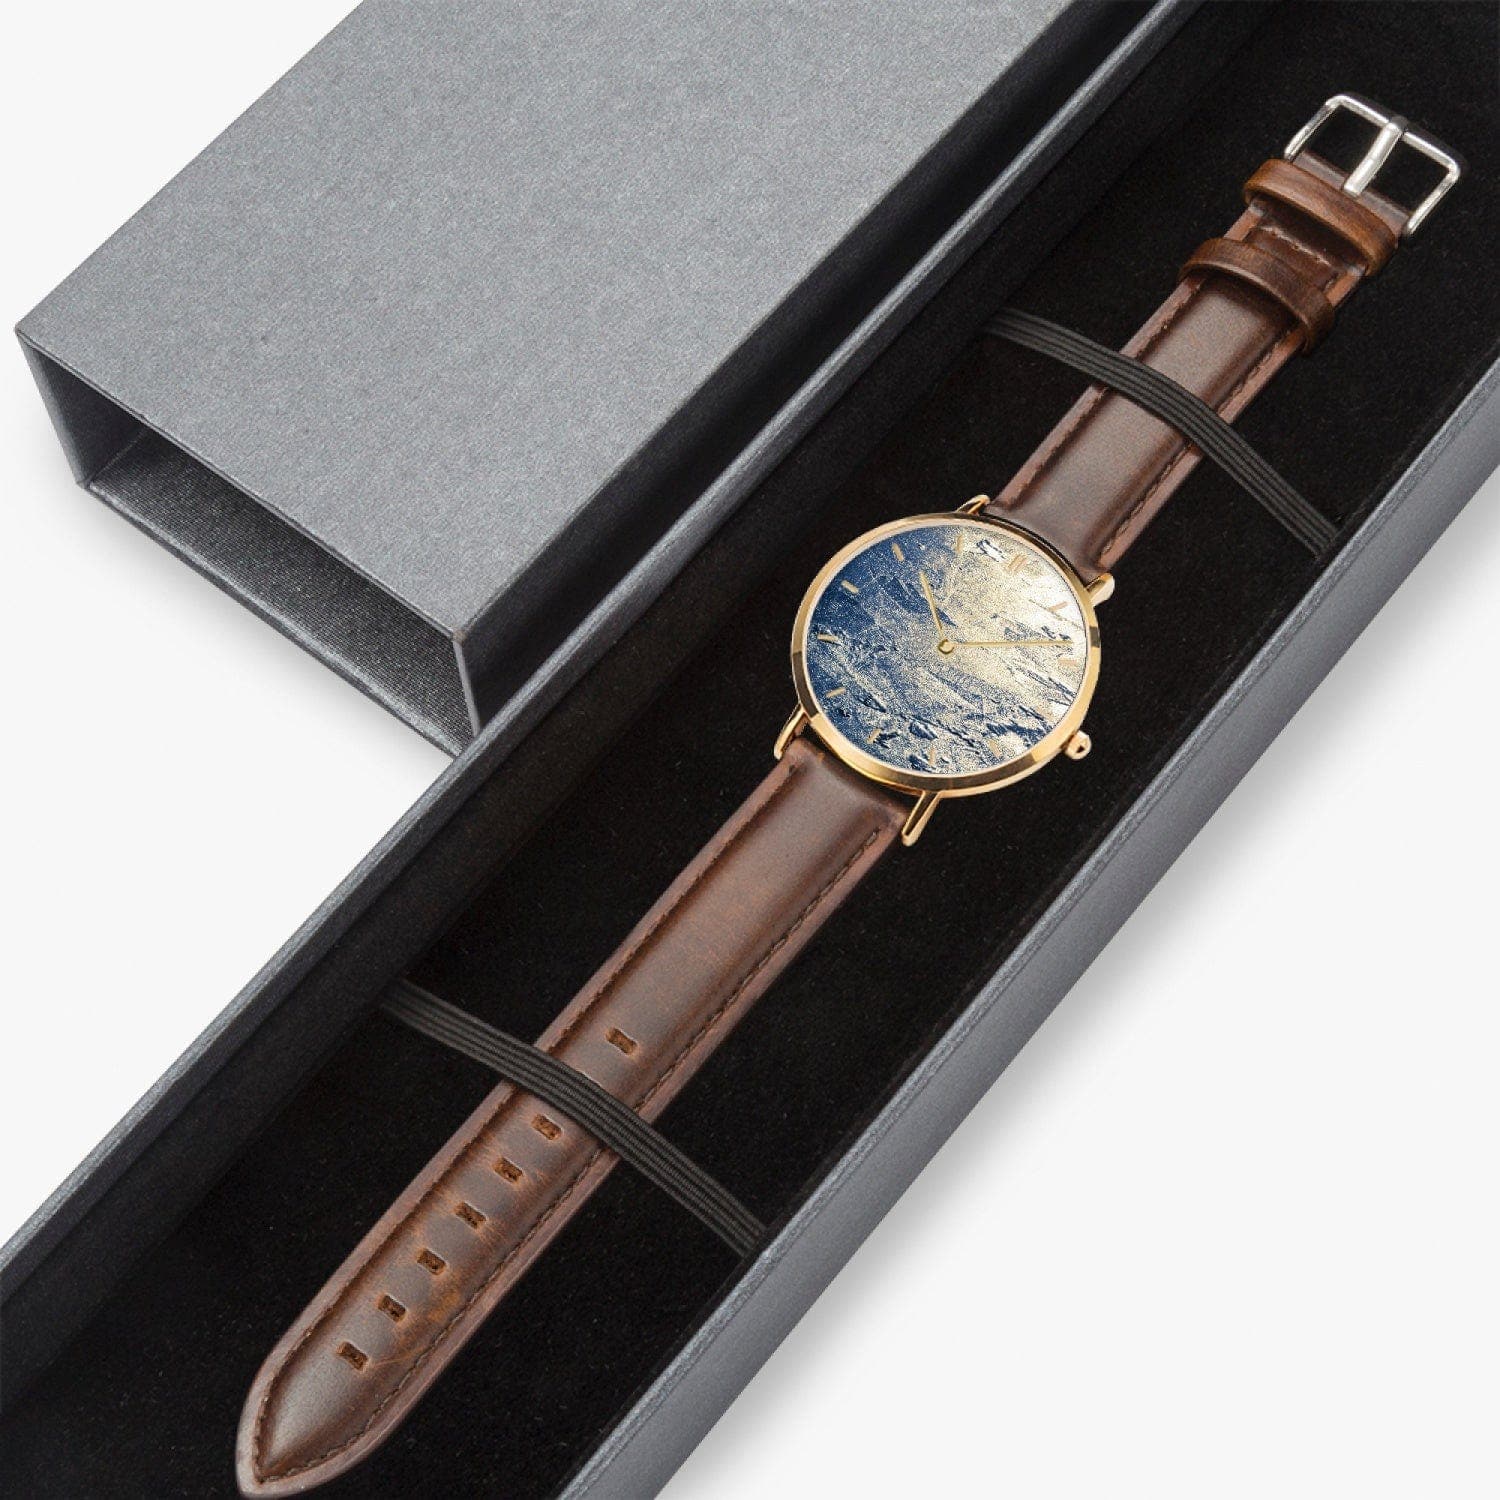 Frozen Time. Hot Selling Ultra-Thin Leather Strap Quartz Watch (Rose Gold With Indicators). Designer watch by Ingrid Hütten